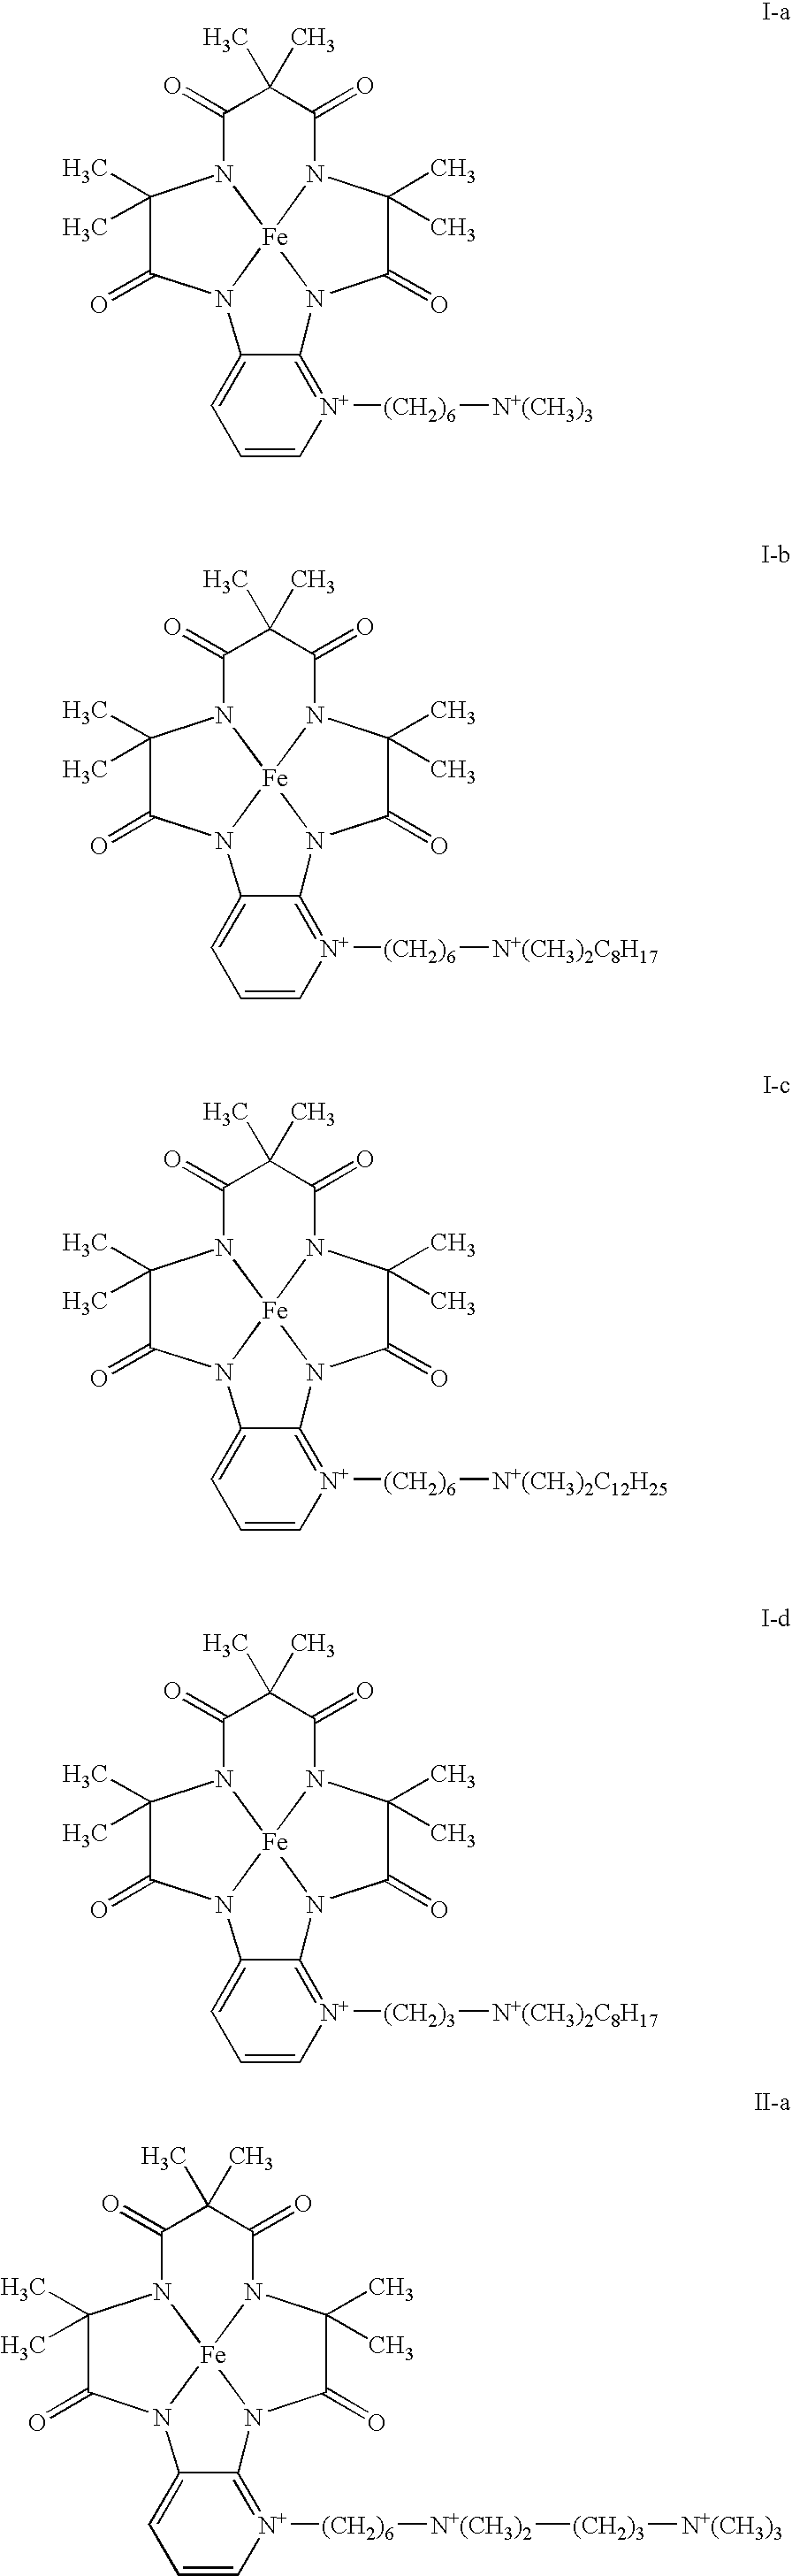 Cycloamide-transition metal complexes and bleach catalysts